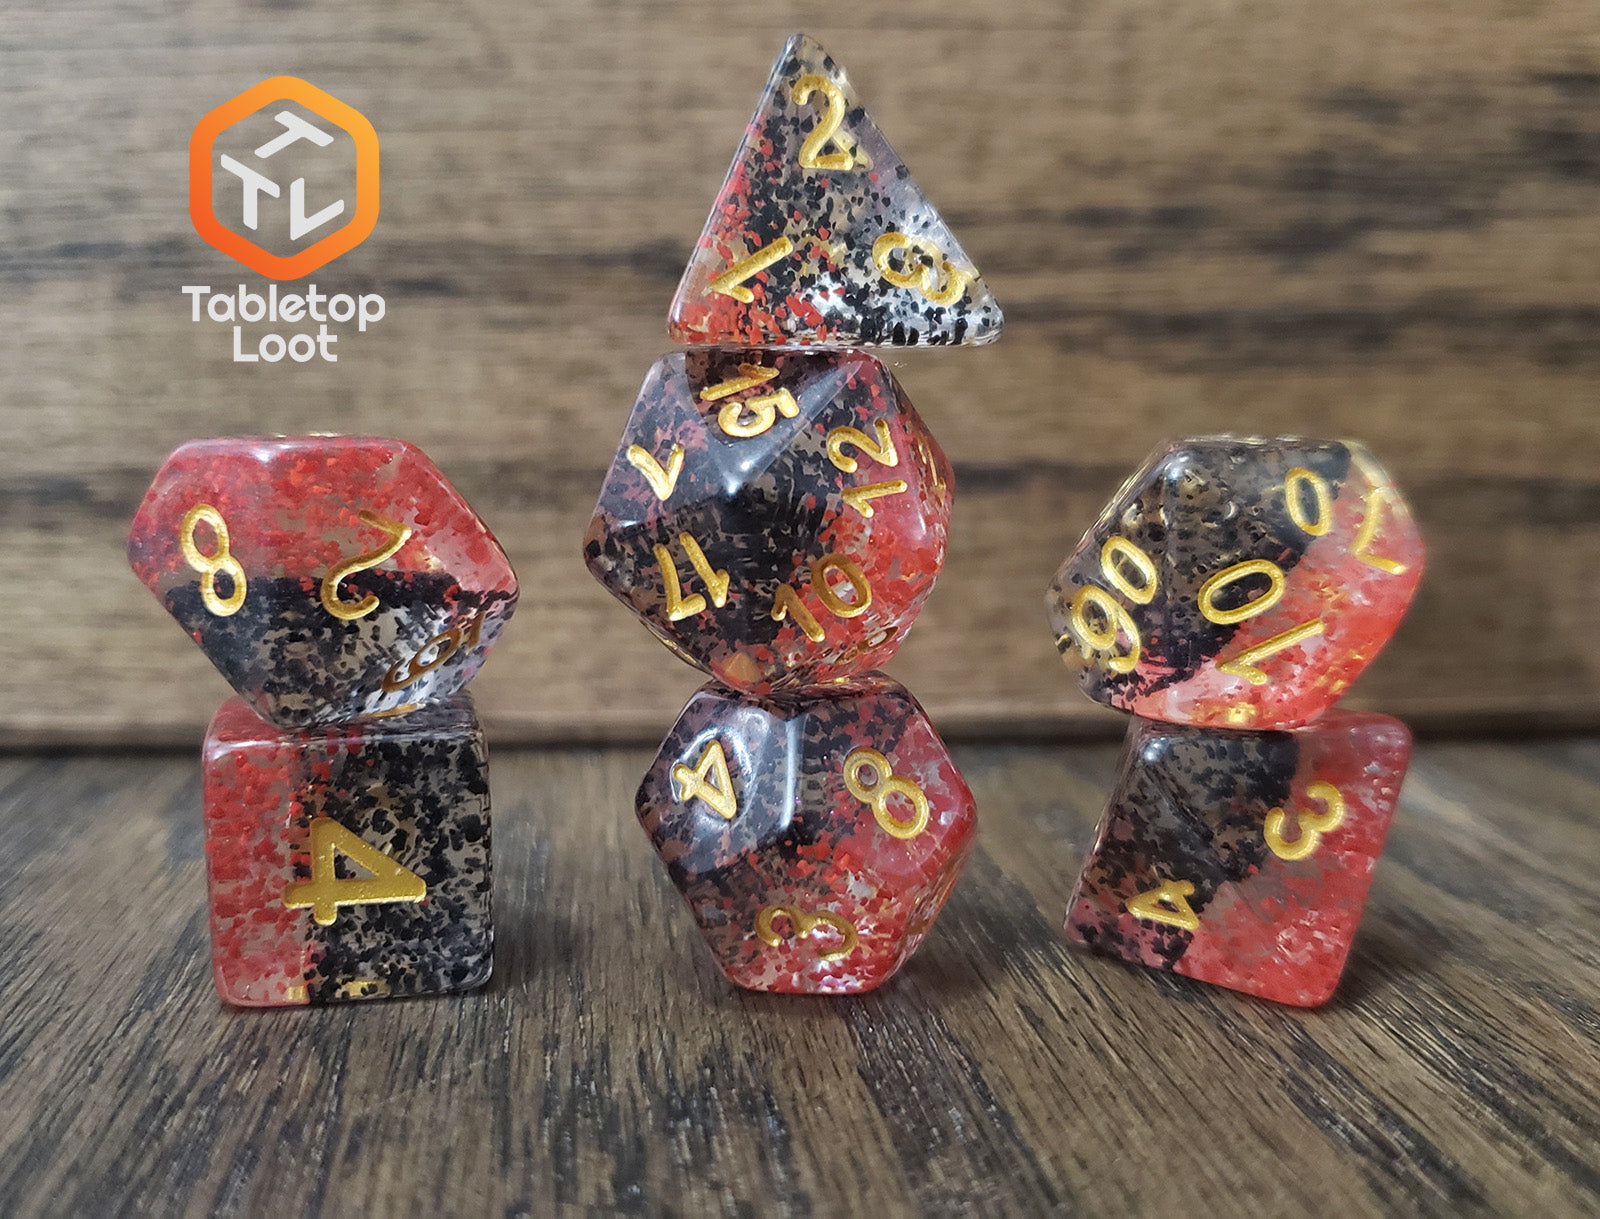 The Contagion 7 piece dice set from Tabletop Loot with black and red speckles suspended in clear and gold numbering.